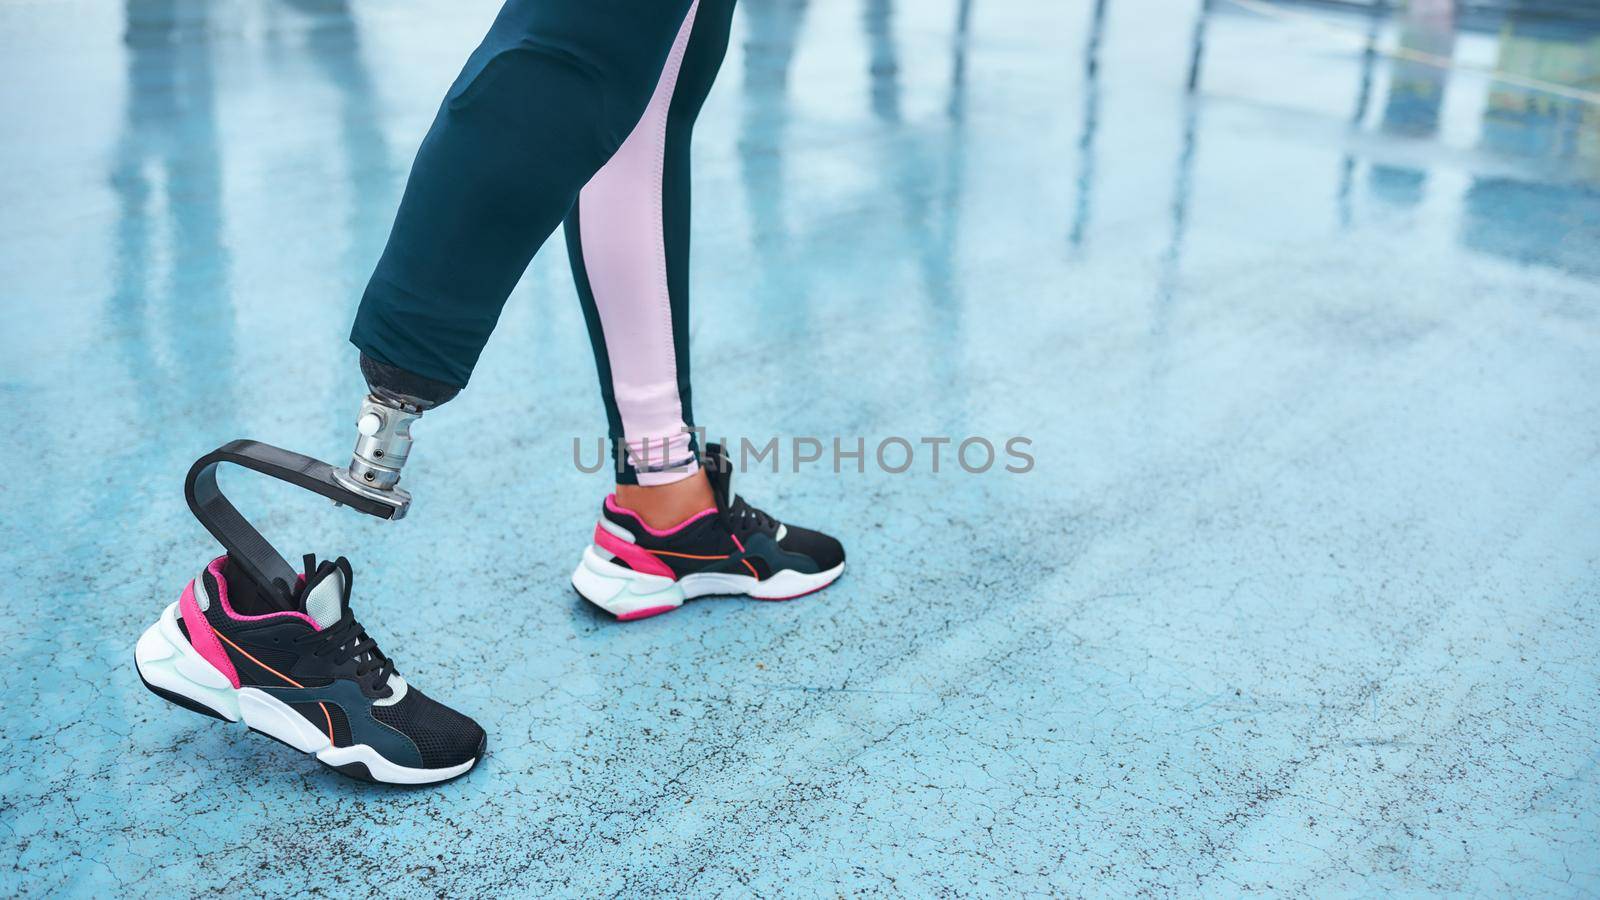 Wake up and workout. Cropped image of disabled athlete woman with prosthetic leg standing on stadium. Sport concept. Disabled Sportsman